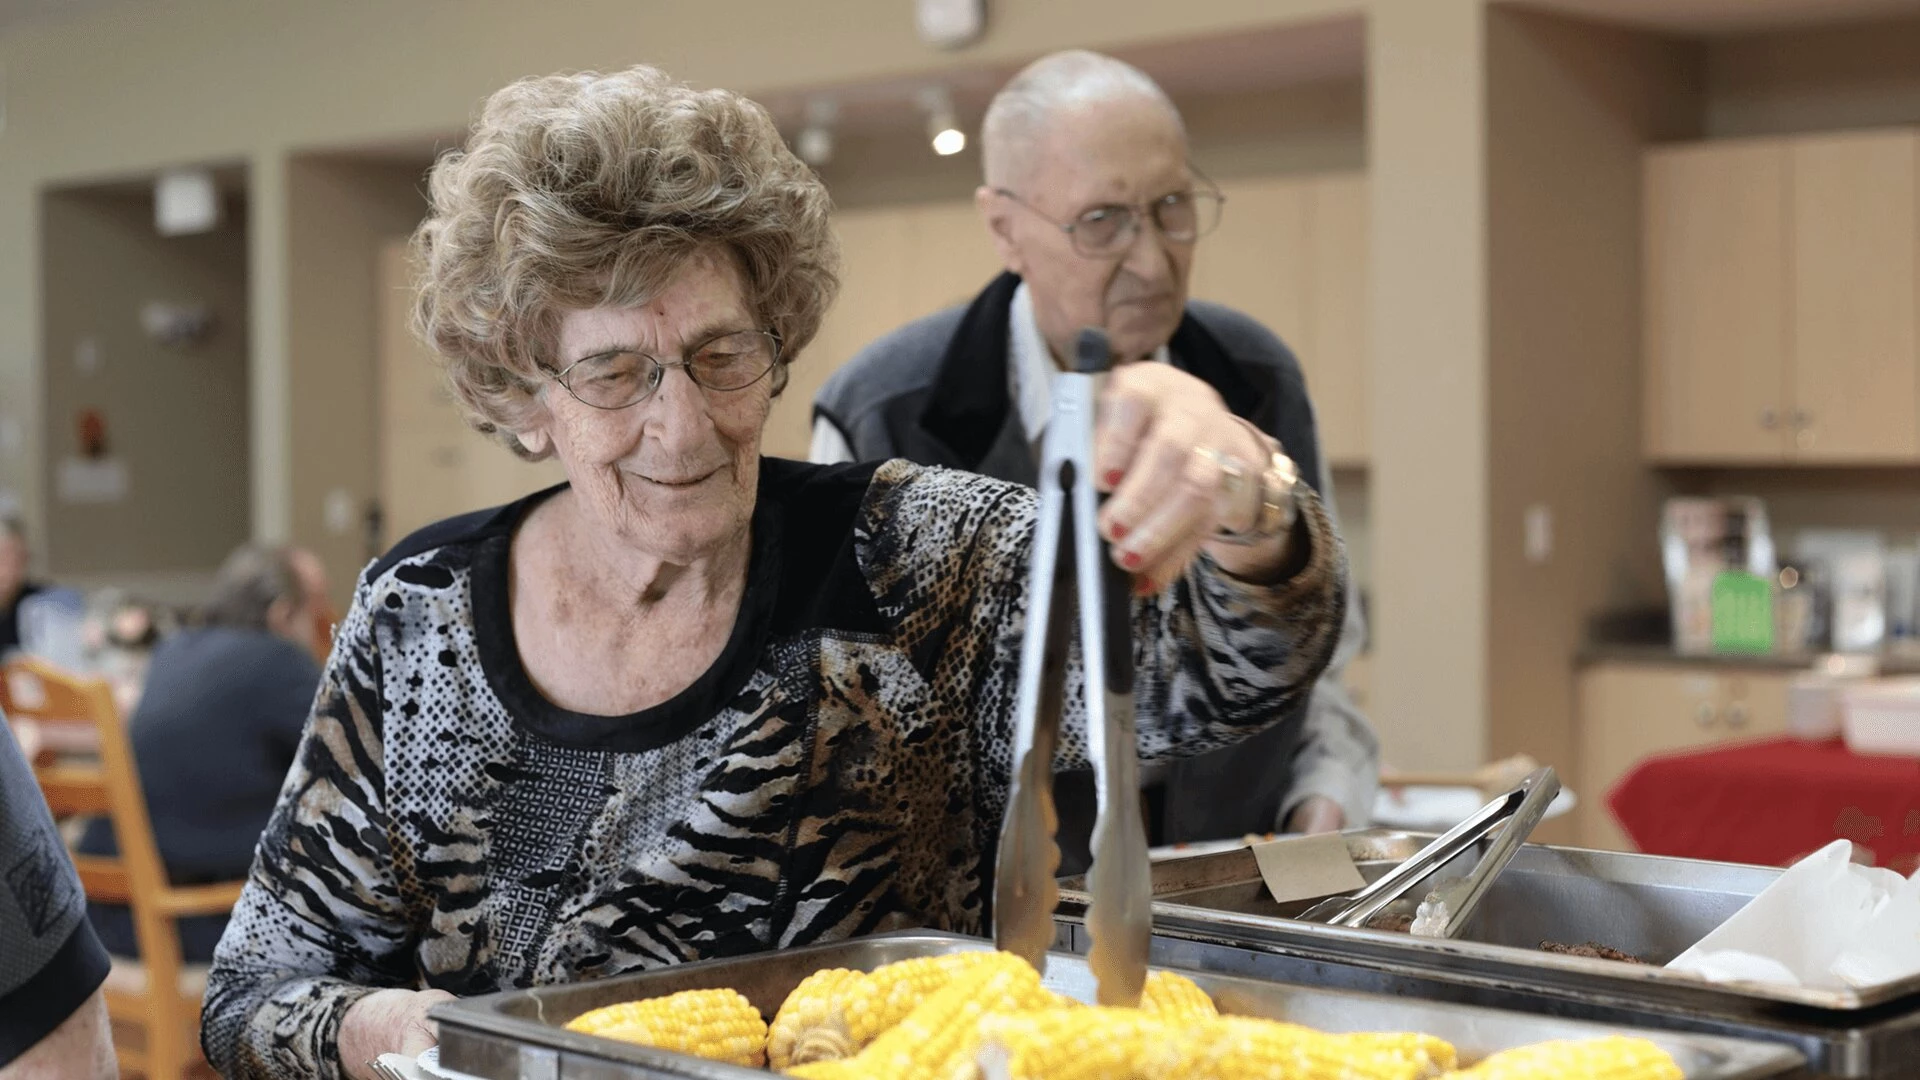 Riverside Manor retirement home offers delicious meals